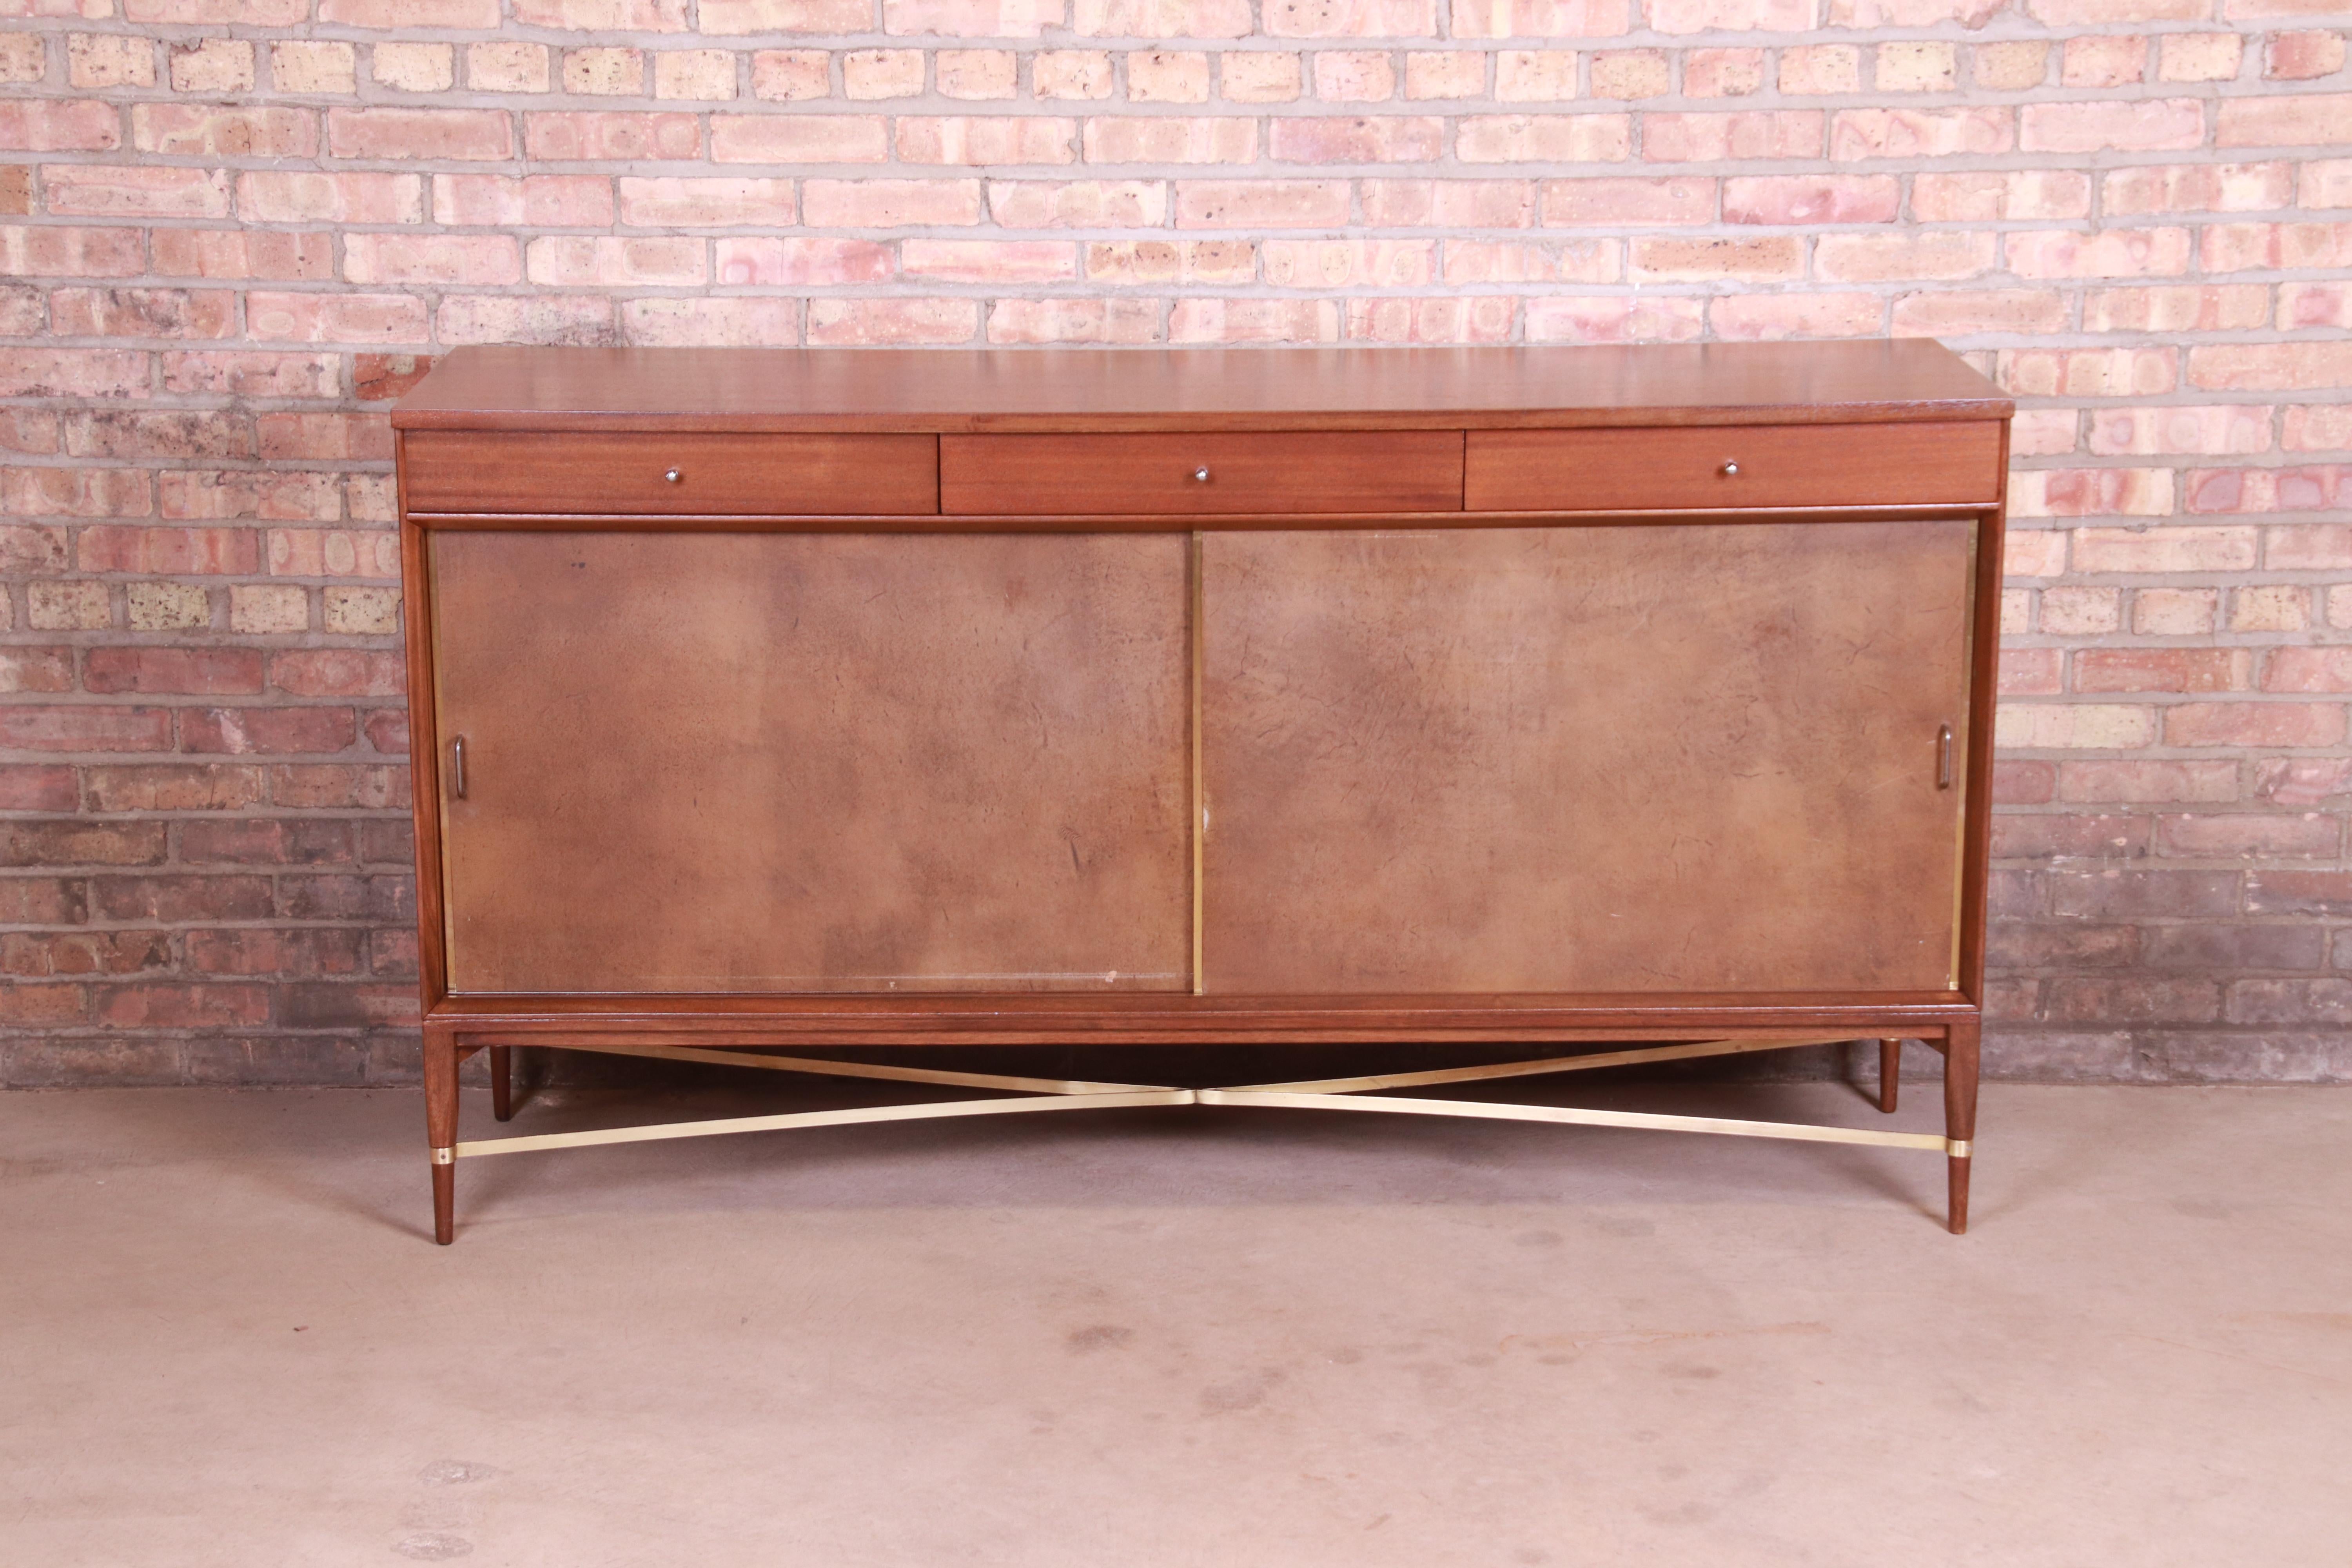 American Paul McCobb for Directional Mahogany, Brass, and Leather Credenza, Refinished